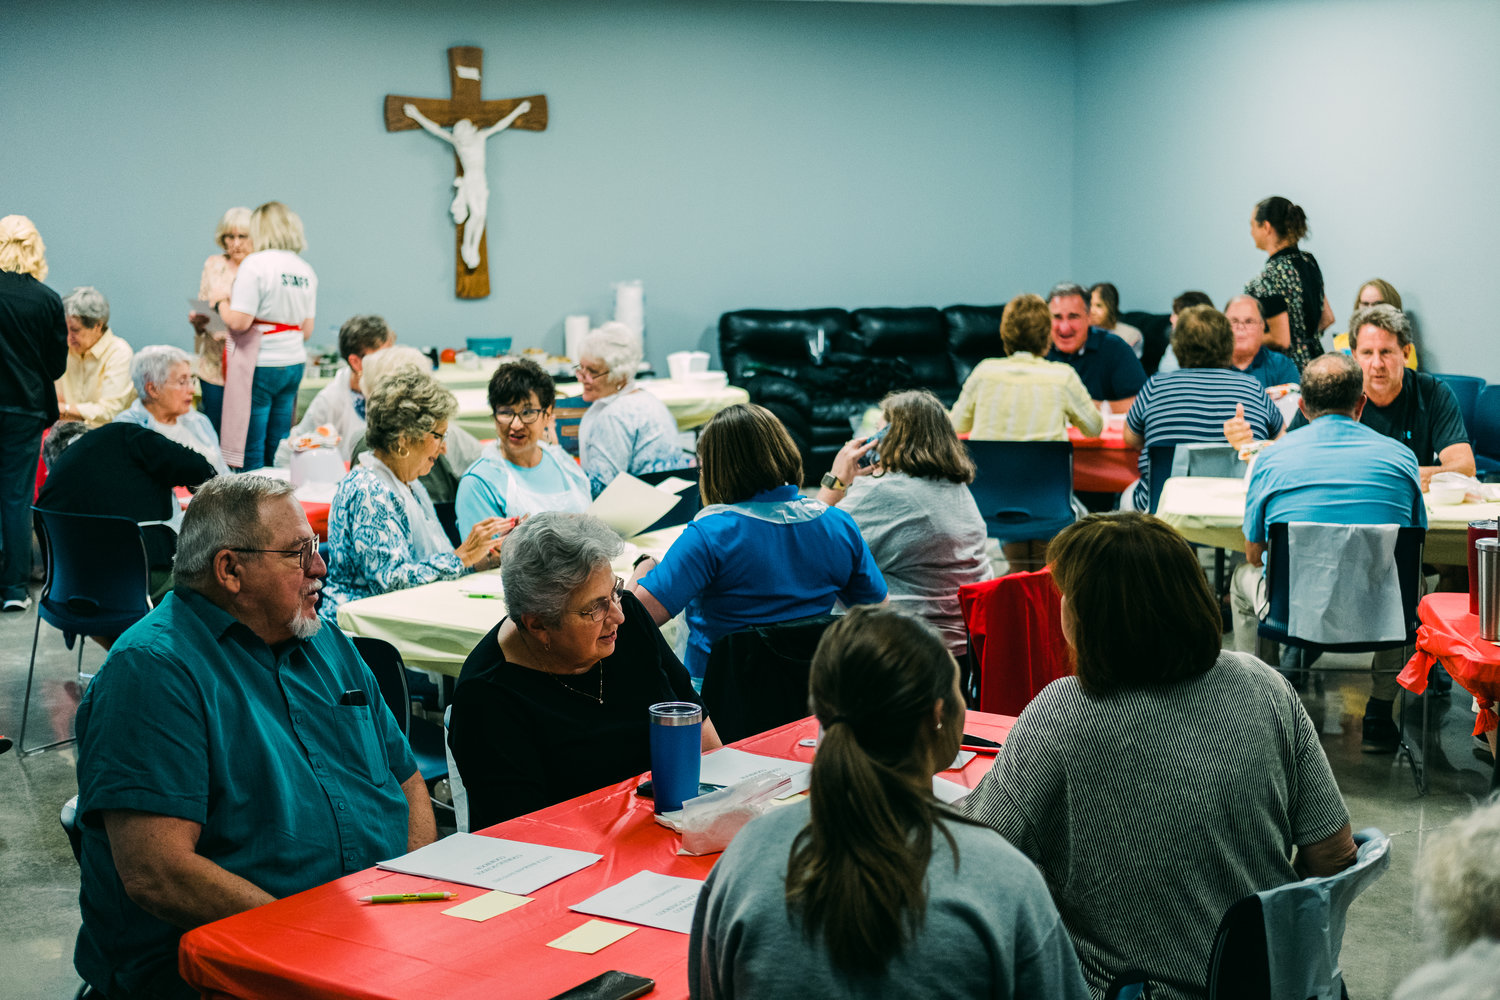 Over 30 participants packed the St. Mary’s Guadalupe Hall for the inaugural Little Balkans Cooking School on Monday, Aug. 29. They were taught how to make fresh pasta, German slaw, pesto and more.